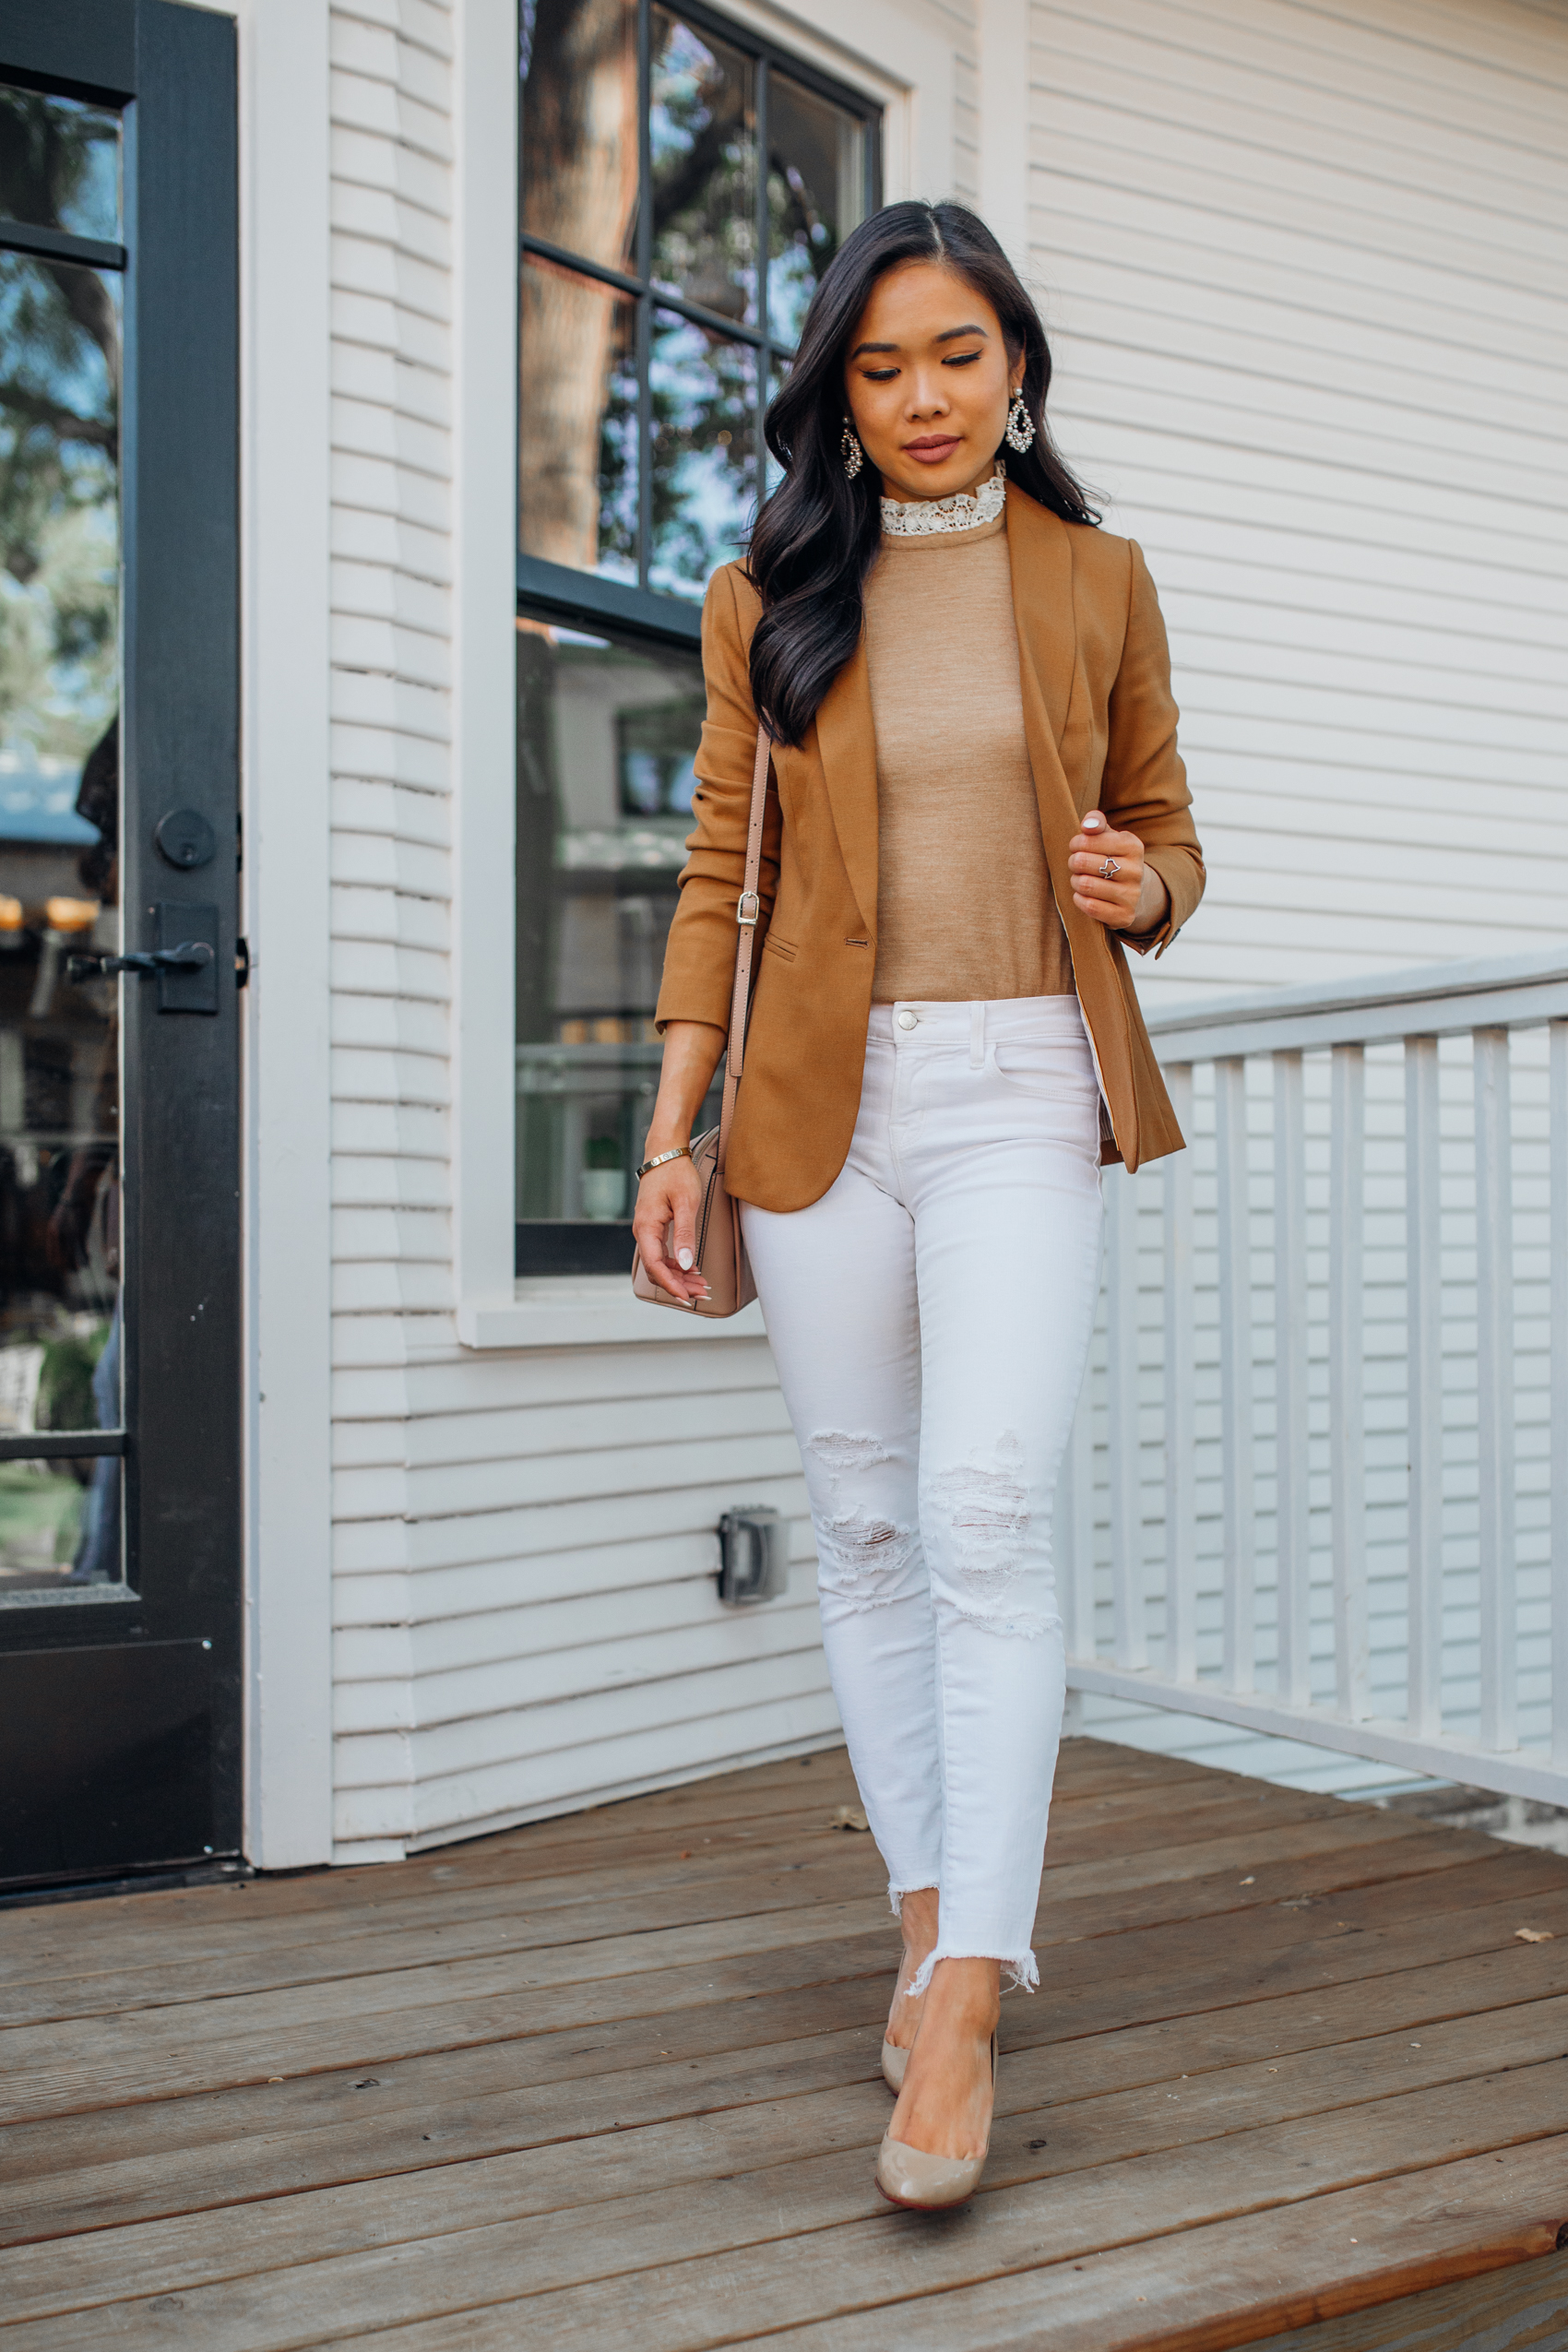 Petite blogger shares a brown blazer outfit from JCrew